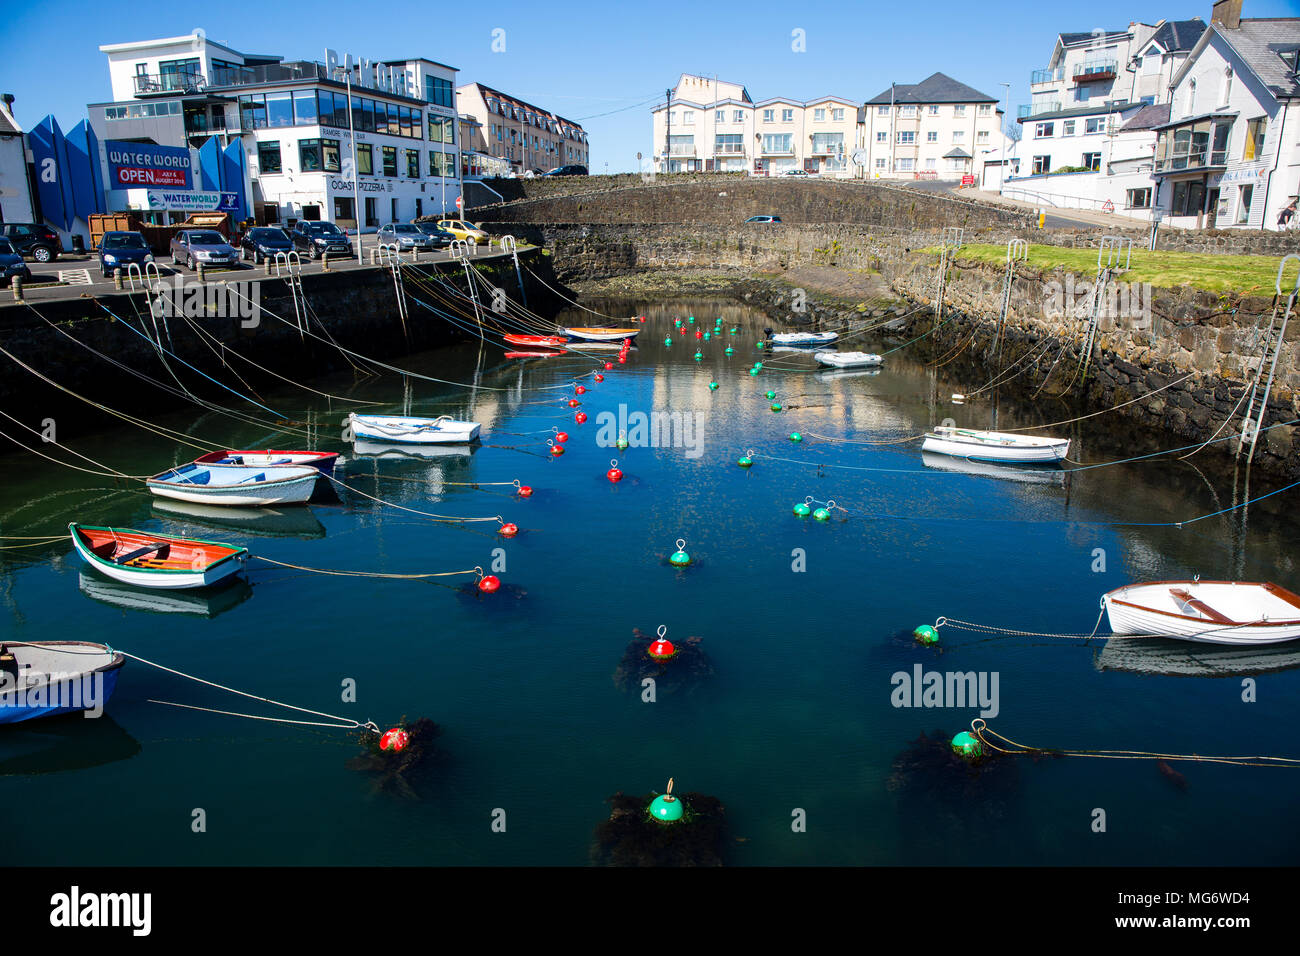 Portrush, Northern Ireland. 27th April 2018. Boats in Portrush Harbour in the sunshine. Credit: Gary Bagshawe/Alamy Live News Stock Photo